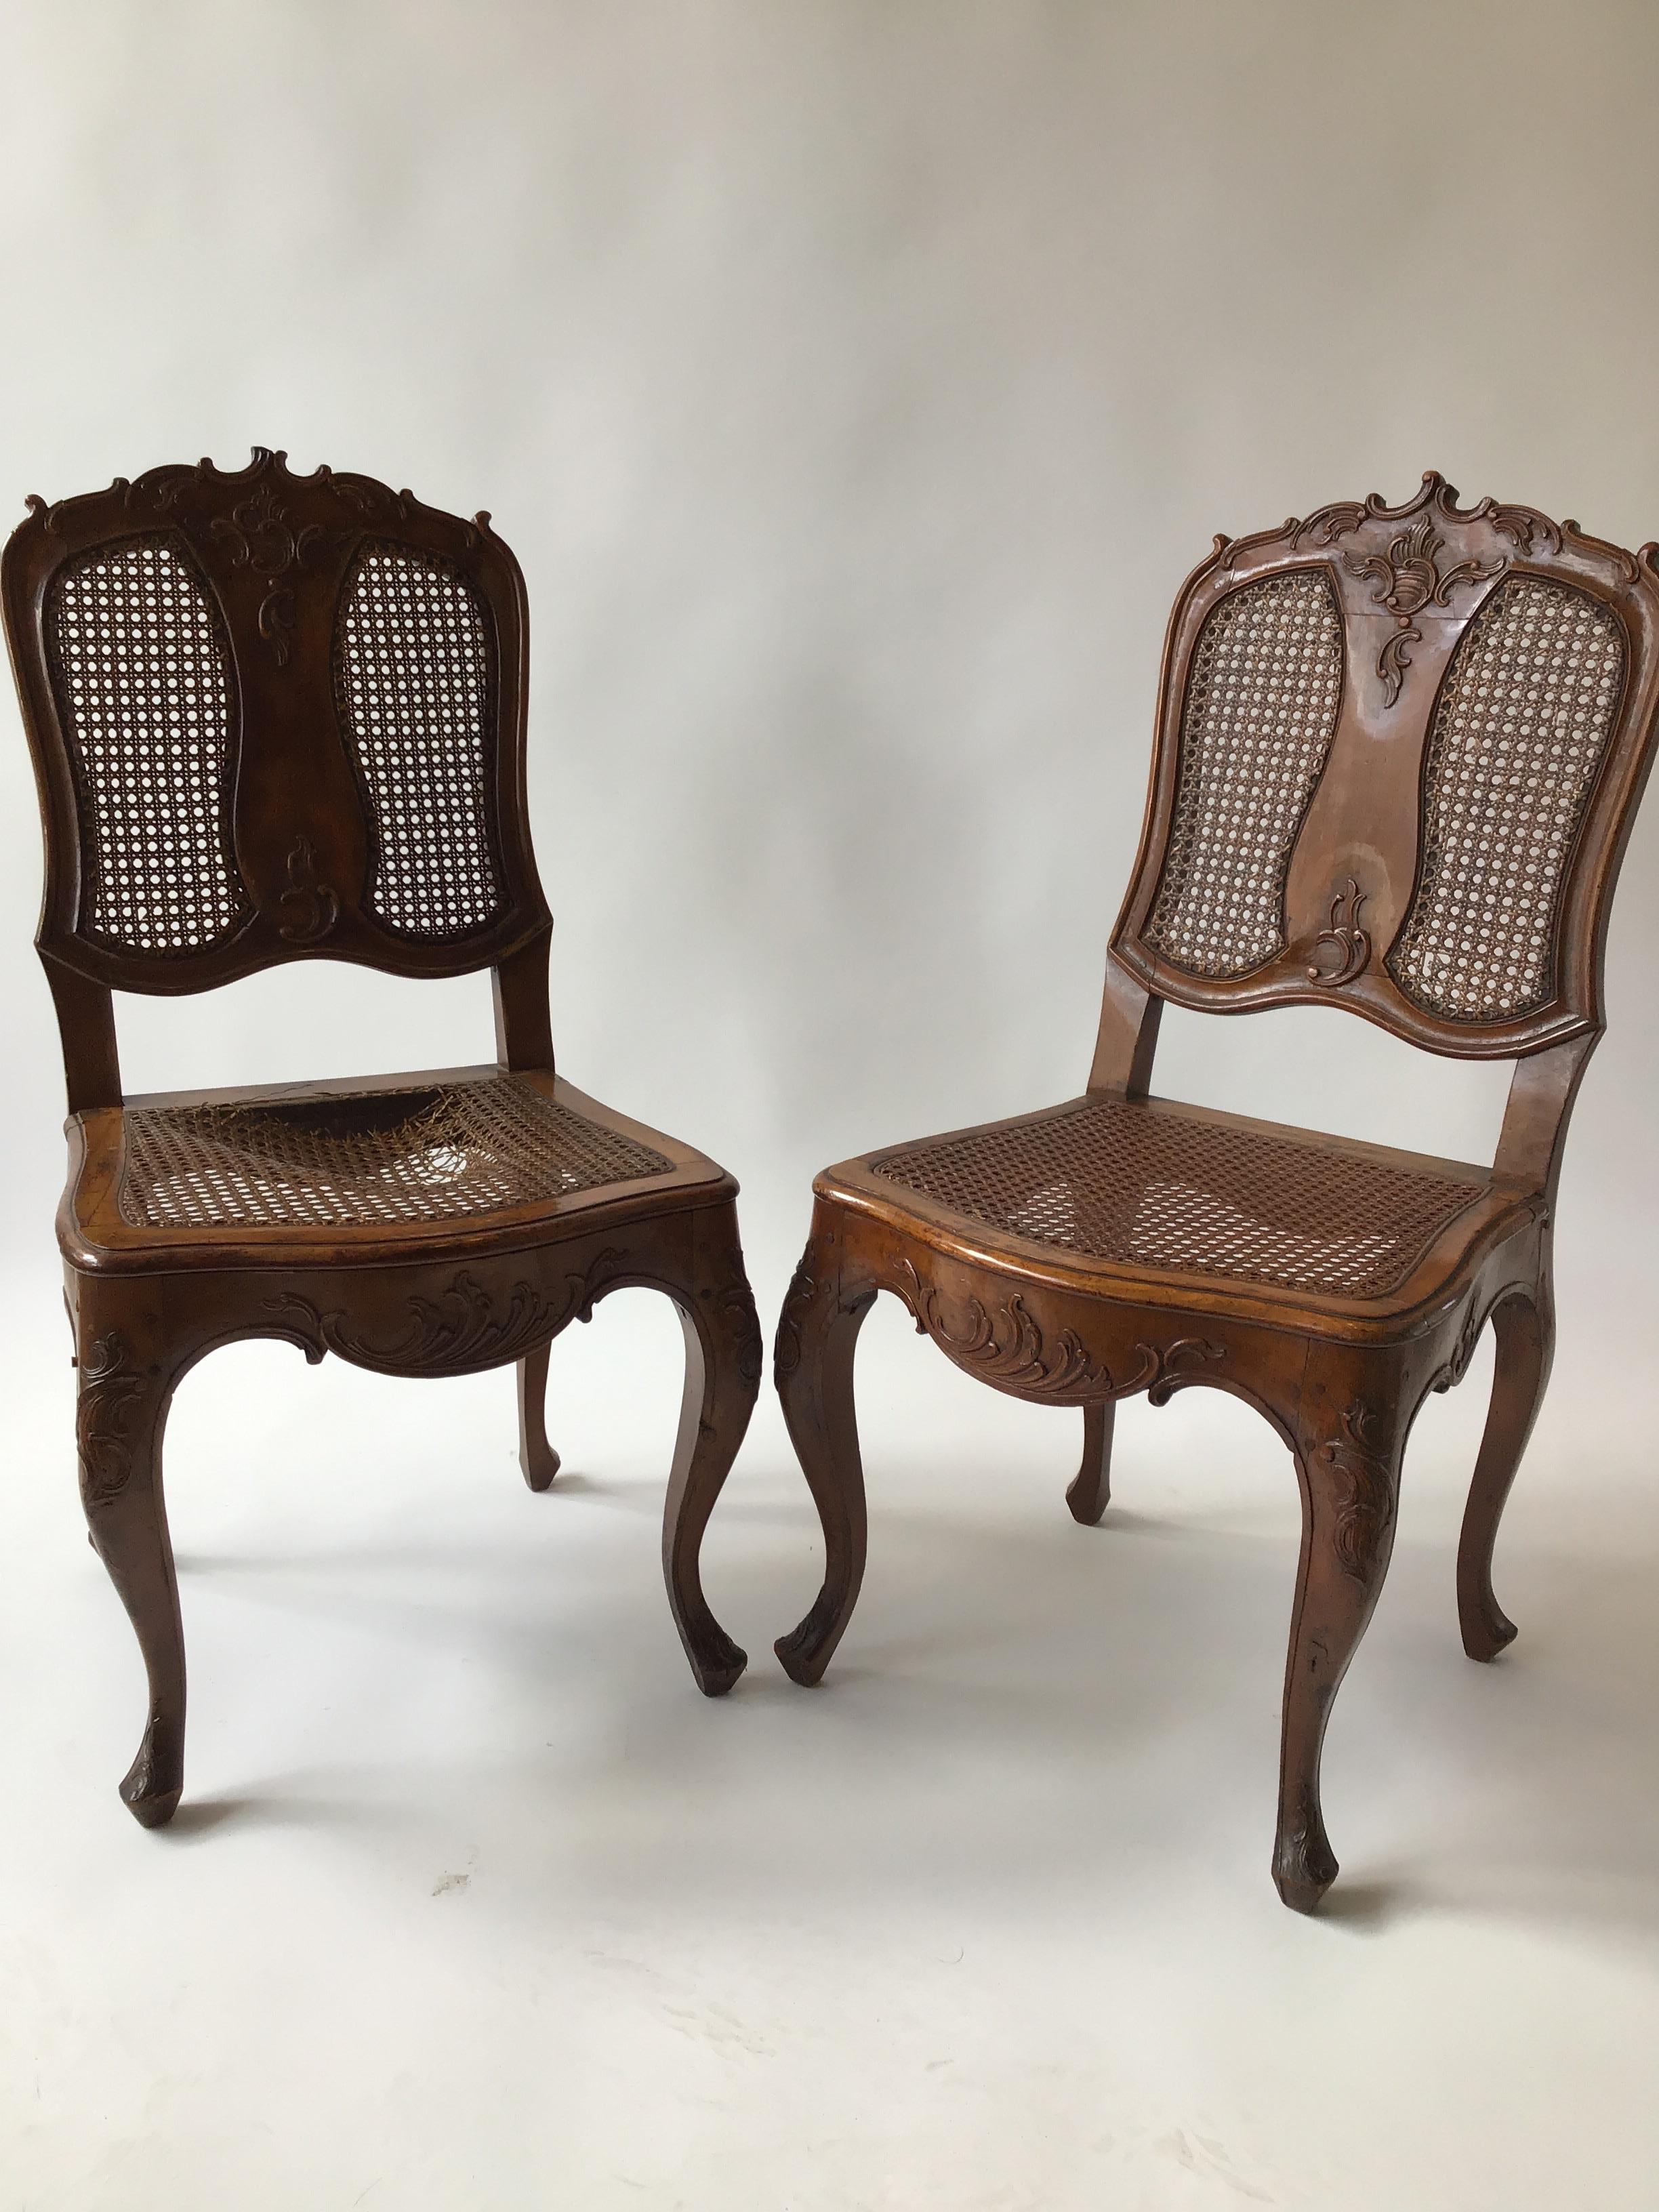 Pair of 1880s French provincial hand carved side chairs.